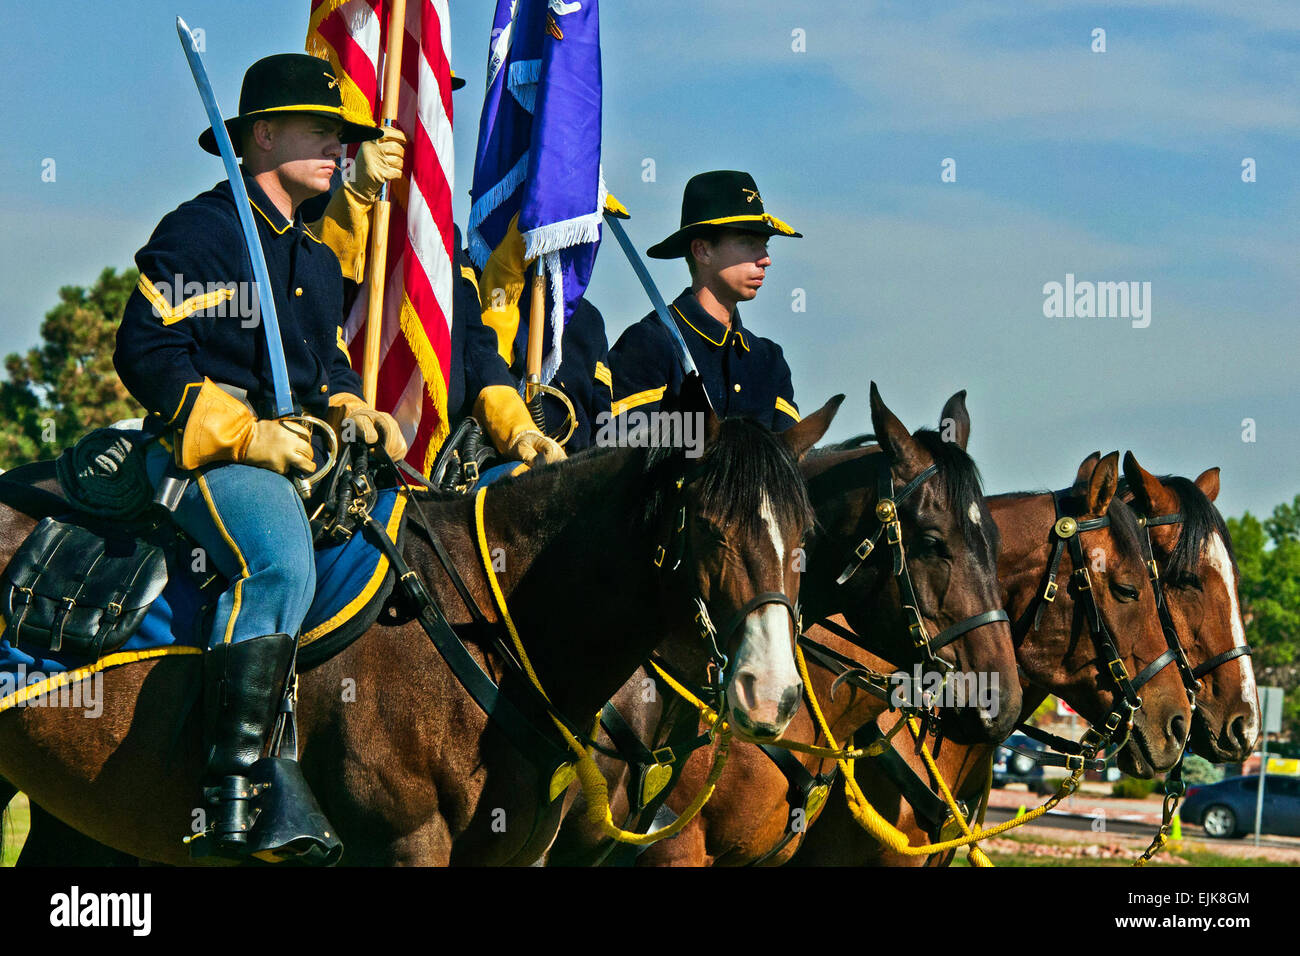 Fort Carson's mounted color guard stands alongside Soldiers from the 440th Civil Affairs Bn. at Fort Carson, Colo., Sept. 15, 2012. Stock Photo